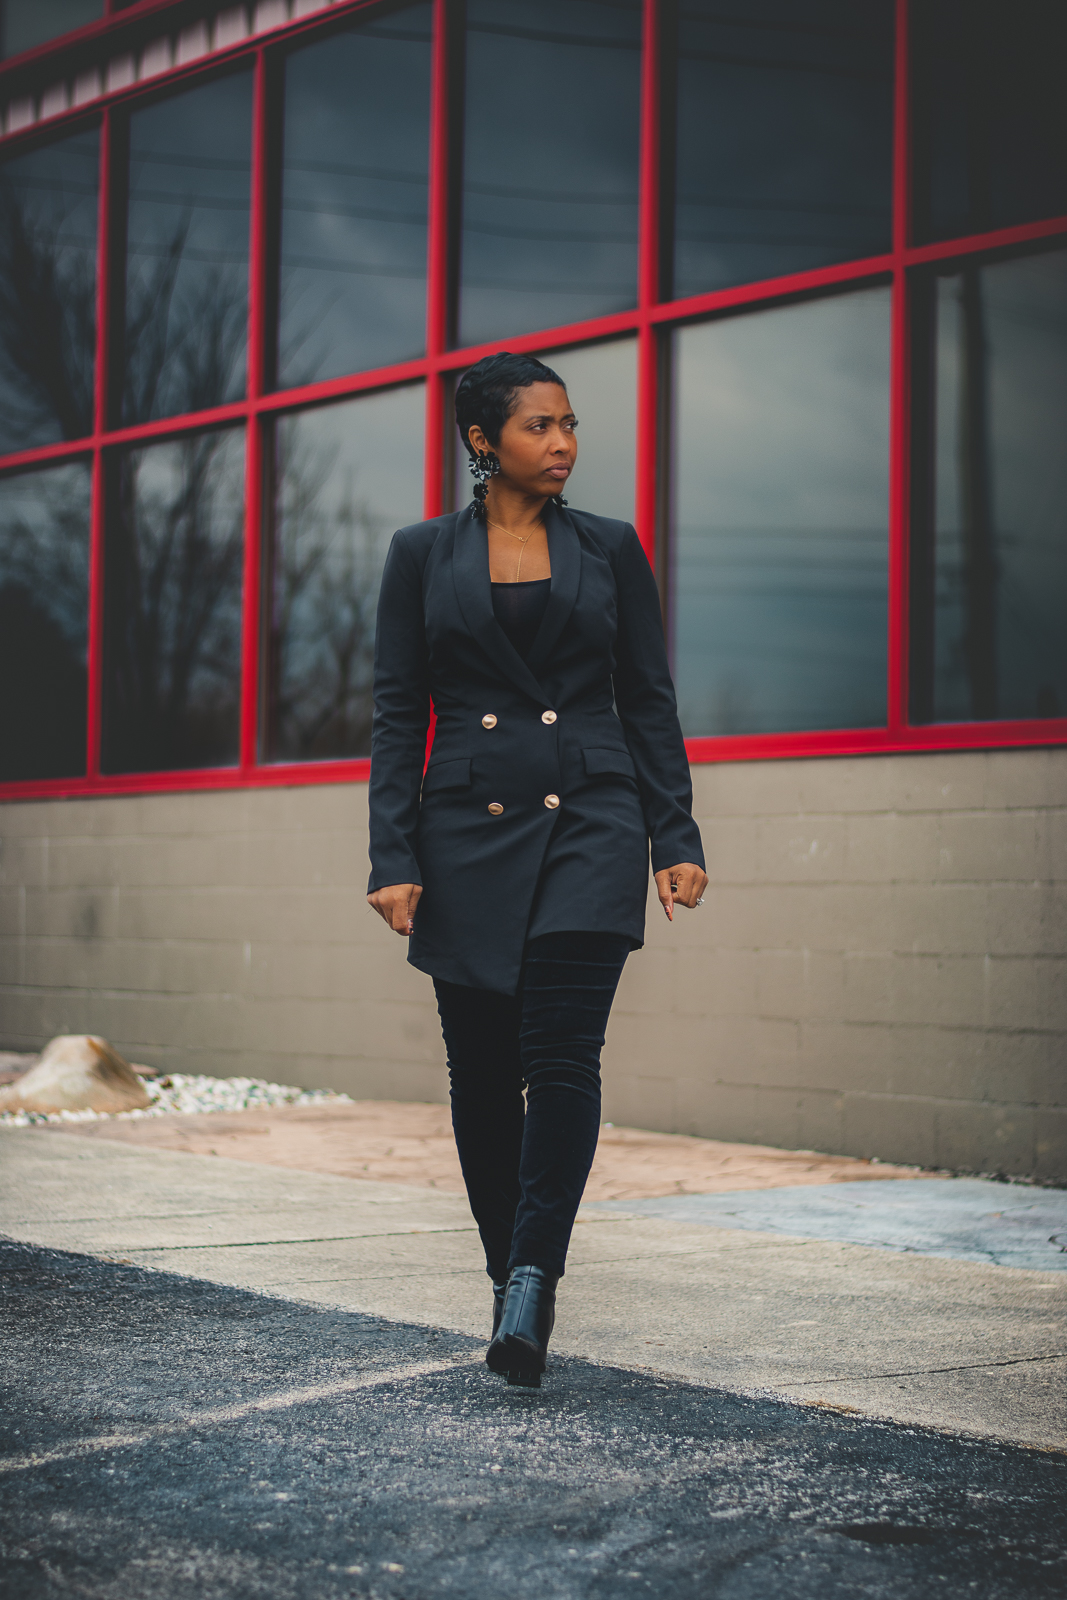 sweenee style, How to wear all black, black holiday looks, black blazer, jeans from gap, indianapolis style blog, indiana fashion blog, black girl who blogs, natural hair, pixie cut